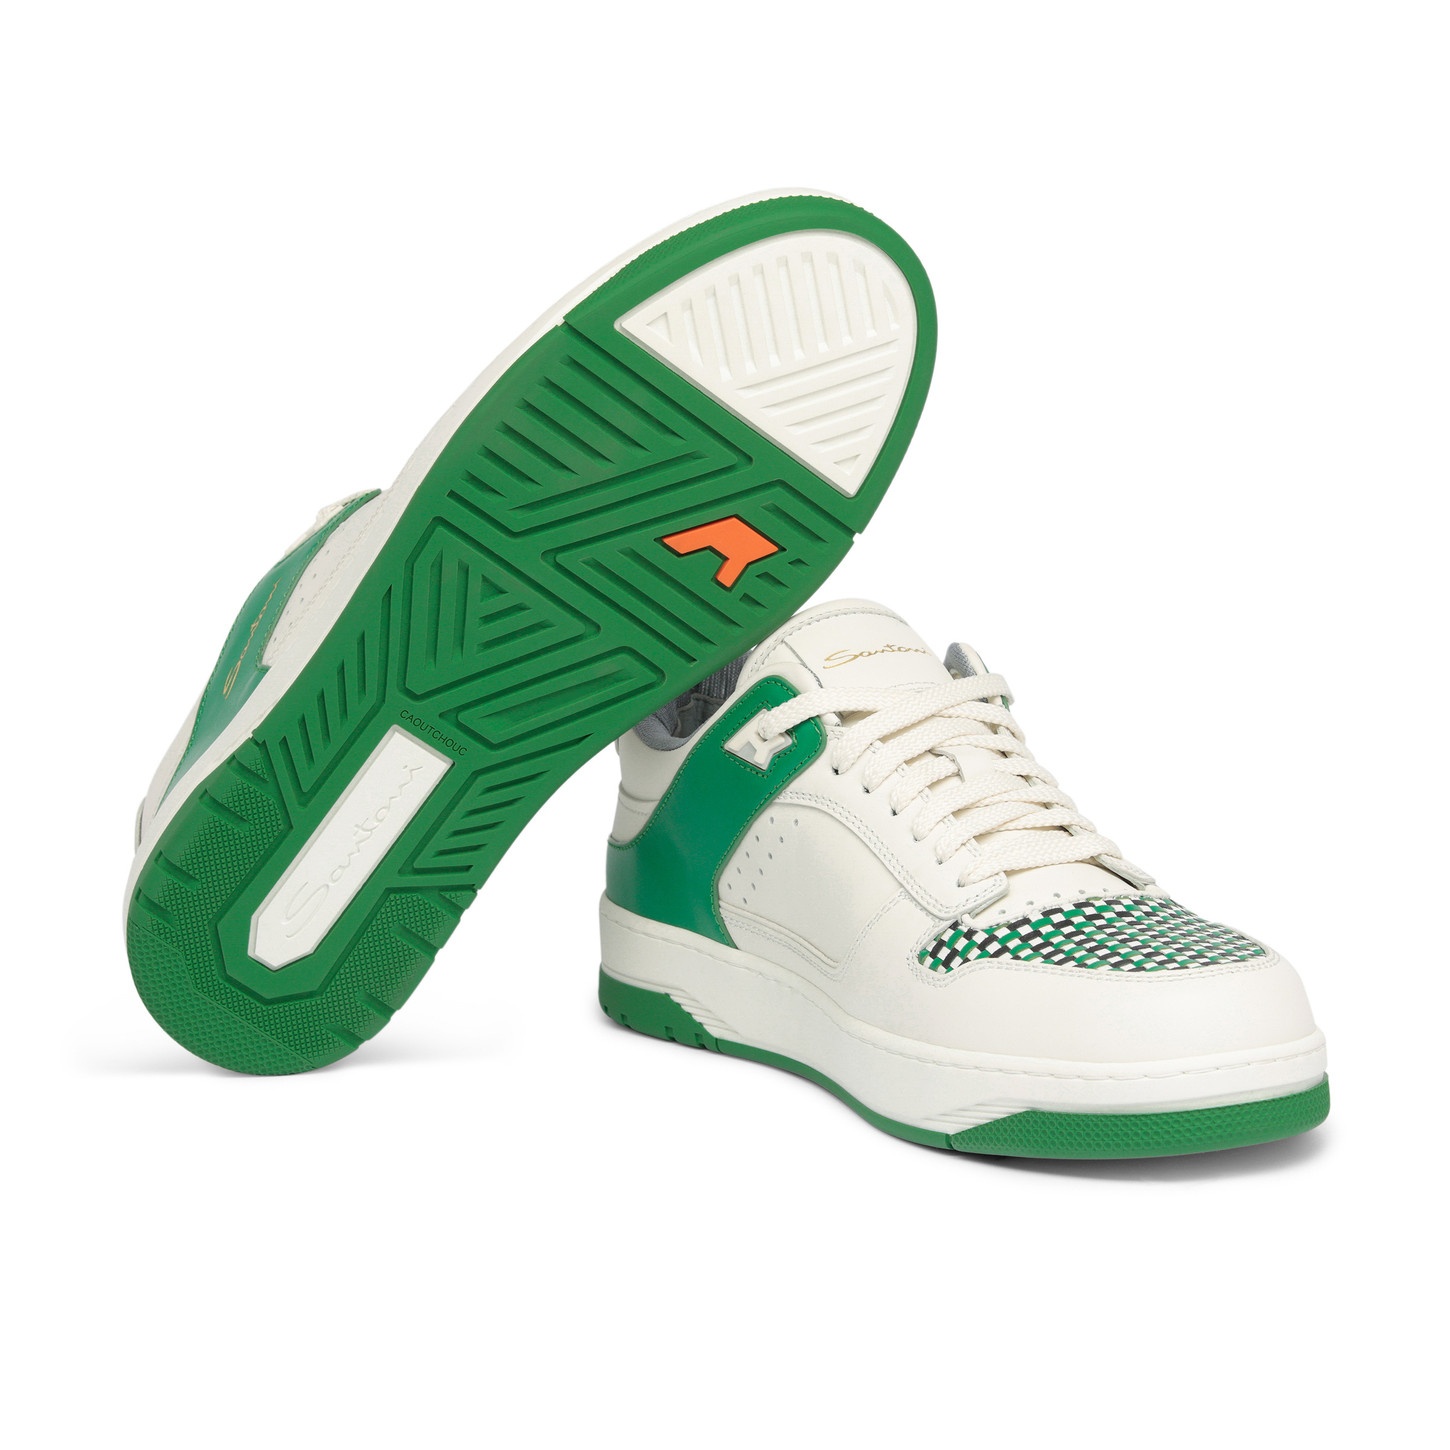 Men's white and green leather Sneak-Air sneaker - 4